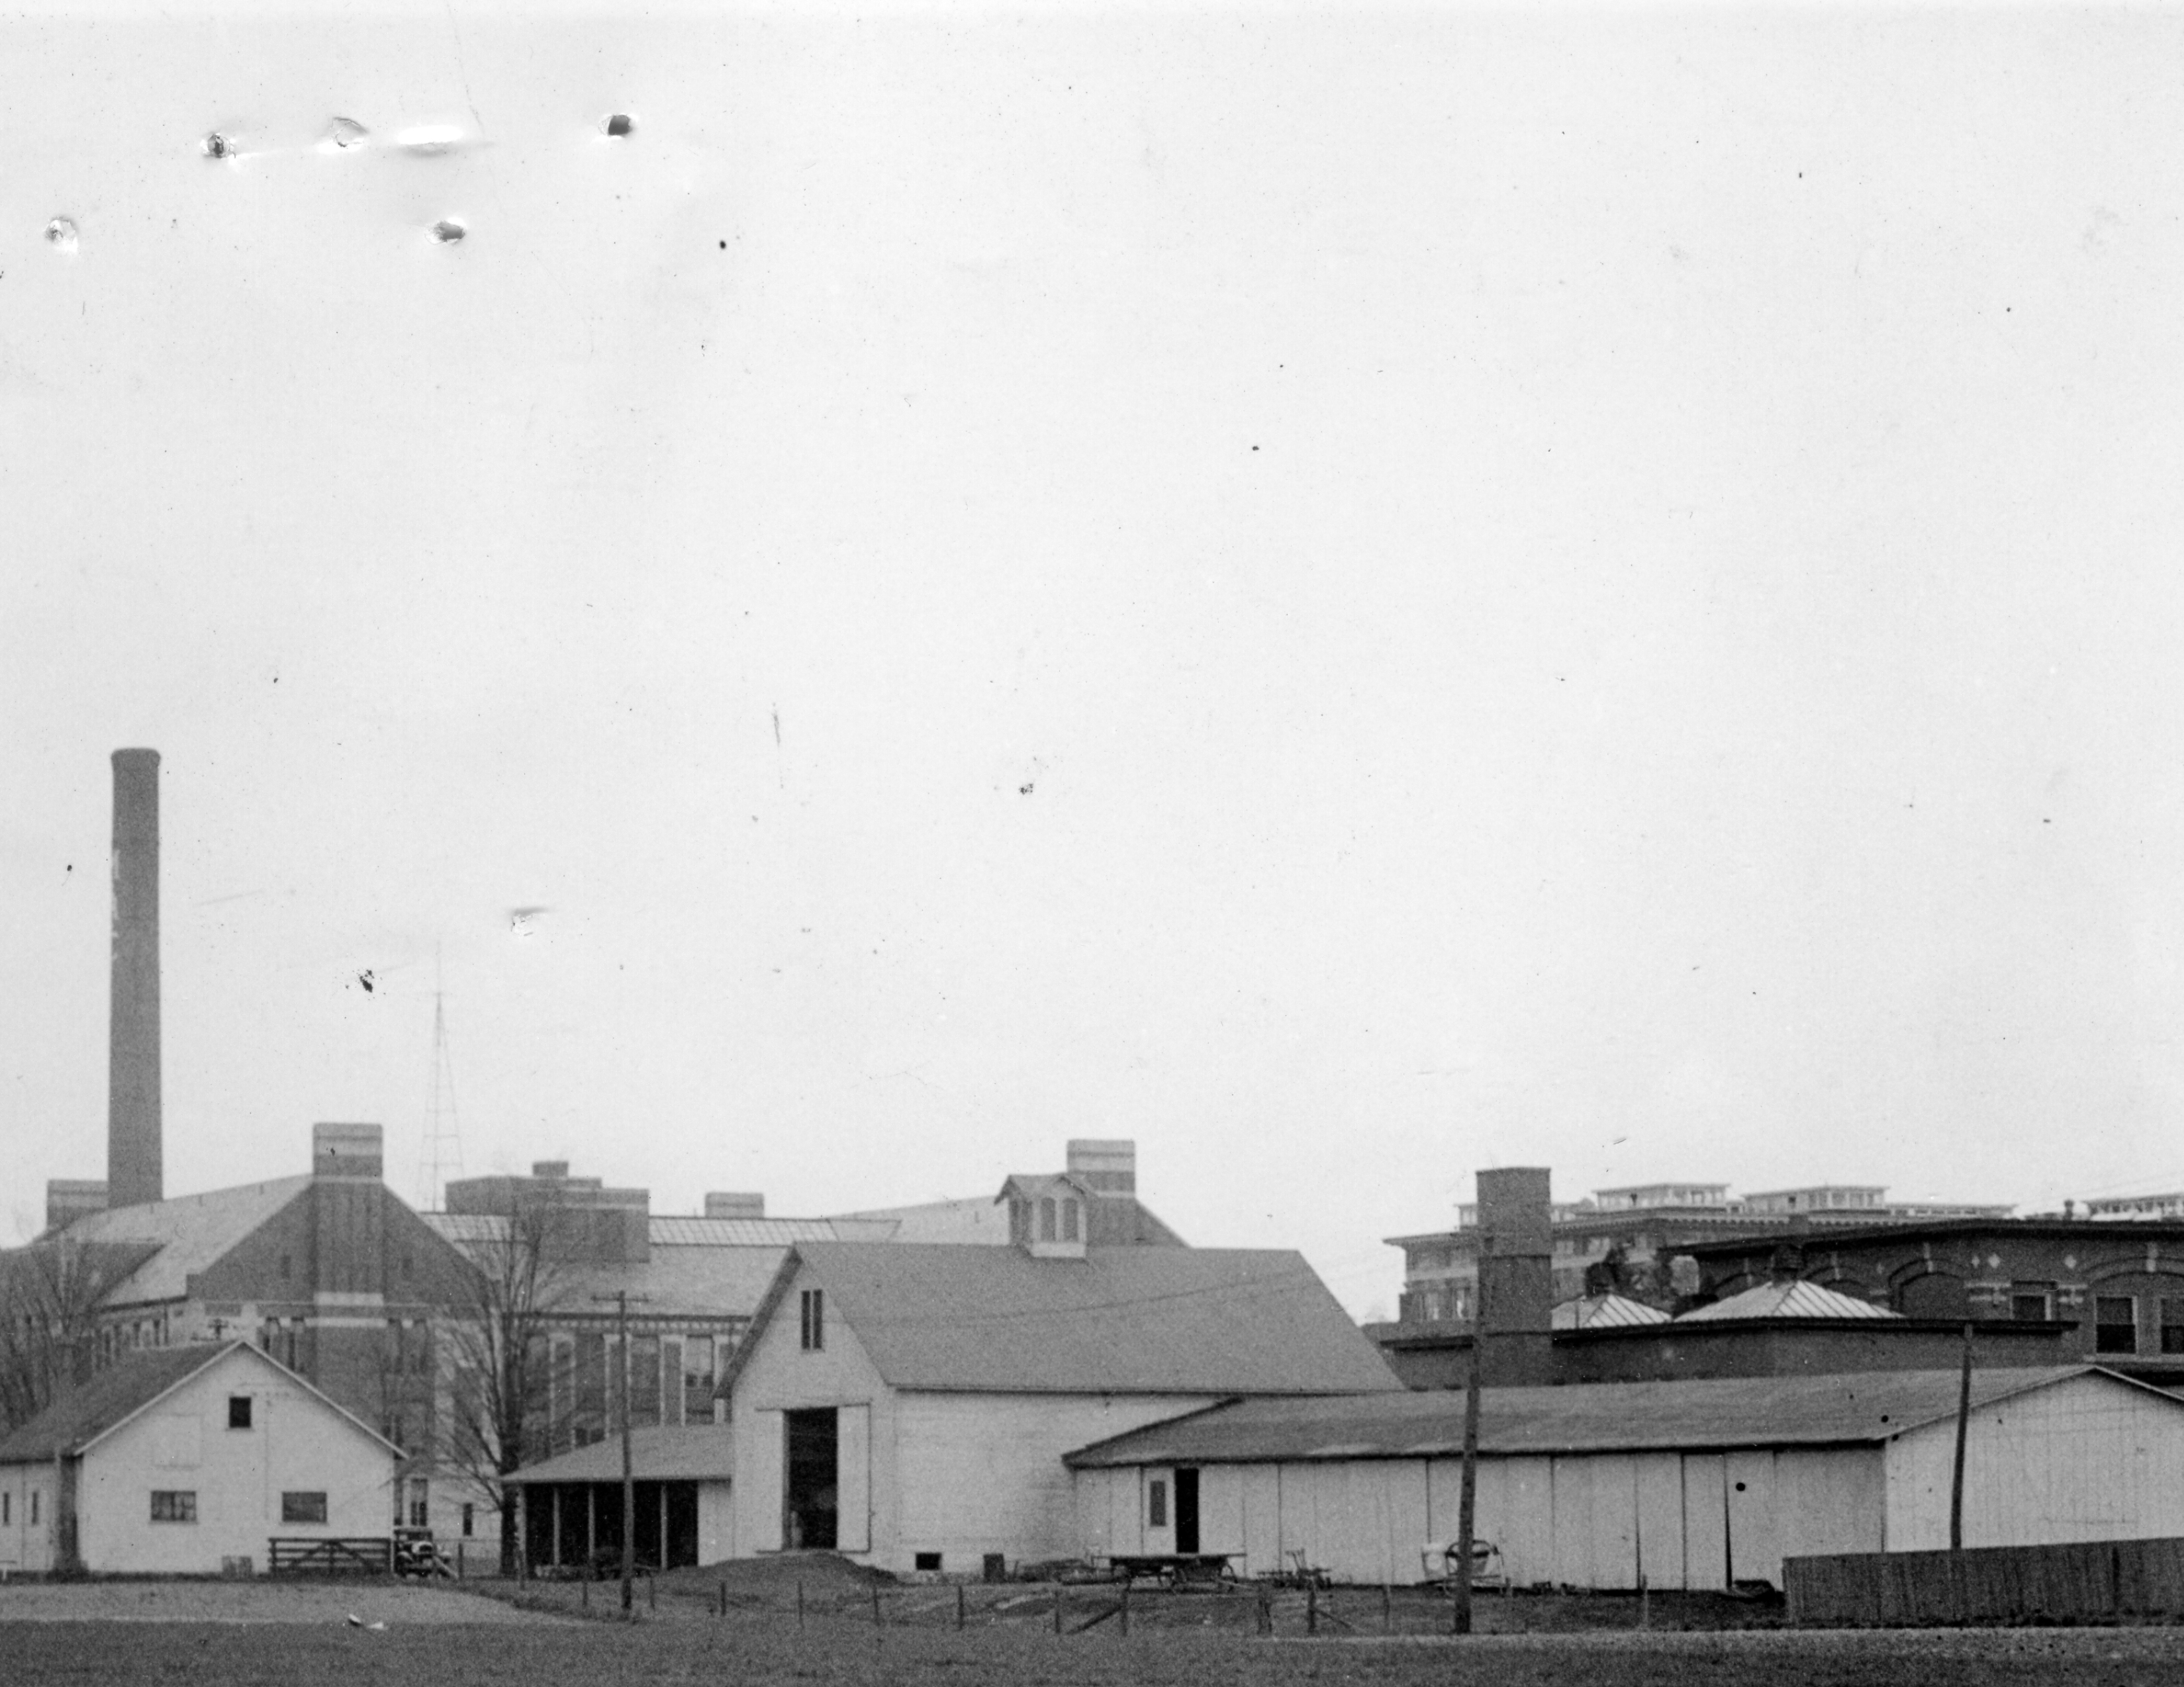 Photograph of the Seed House and Tool Shed